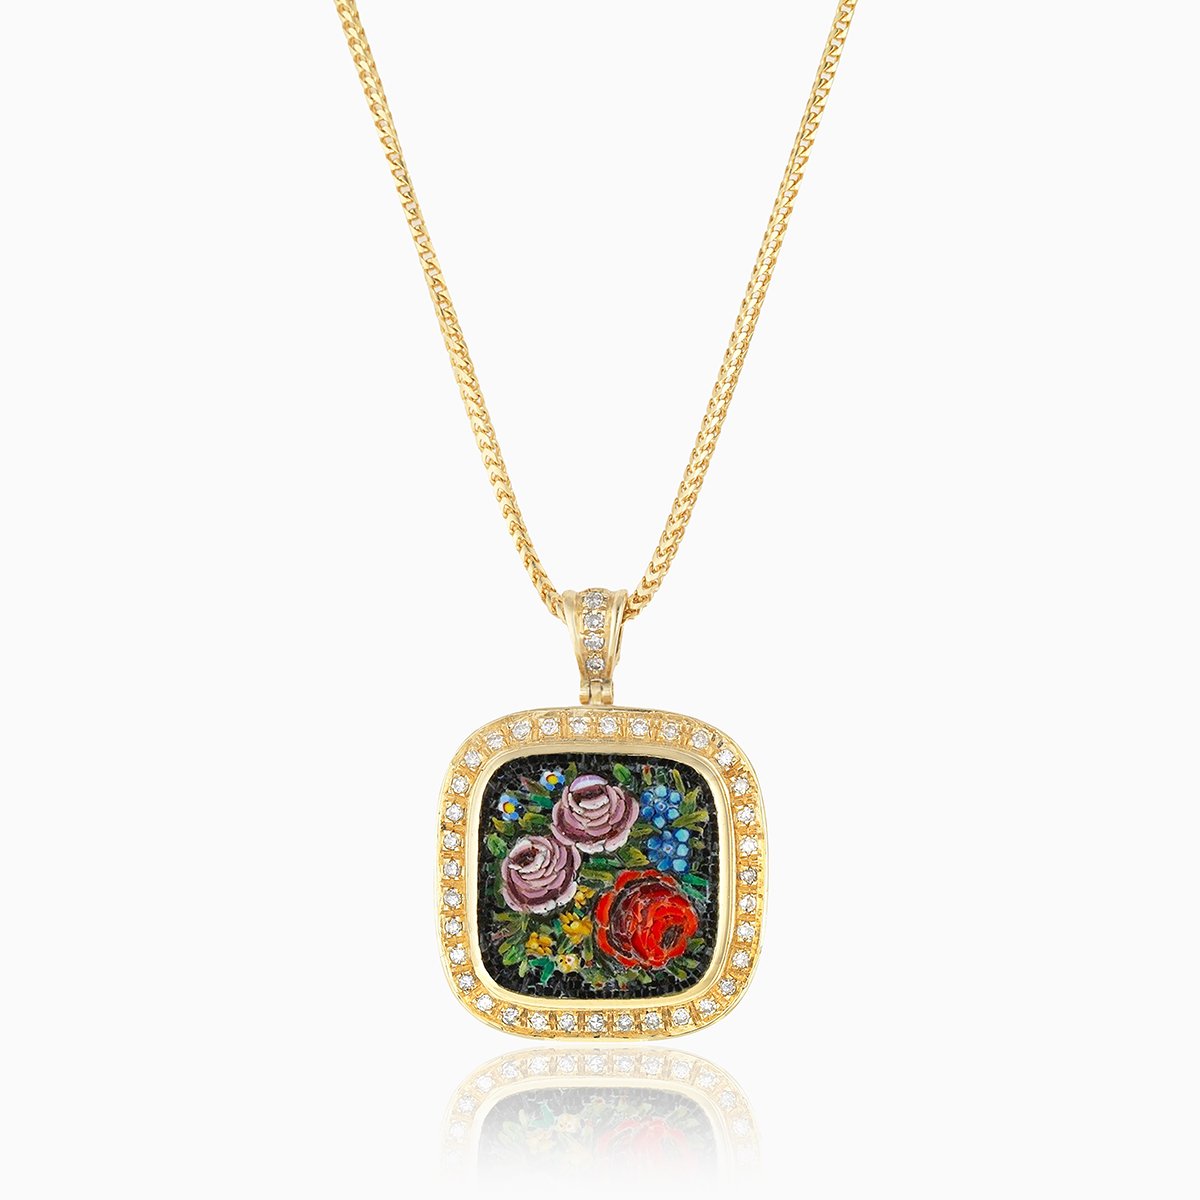 18 ct gold square locket set with a micromosaic flower design and diamonds around the edge, on an 18 ct gold franco chain. The bail also set with diamonds